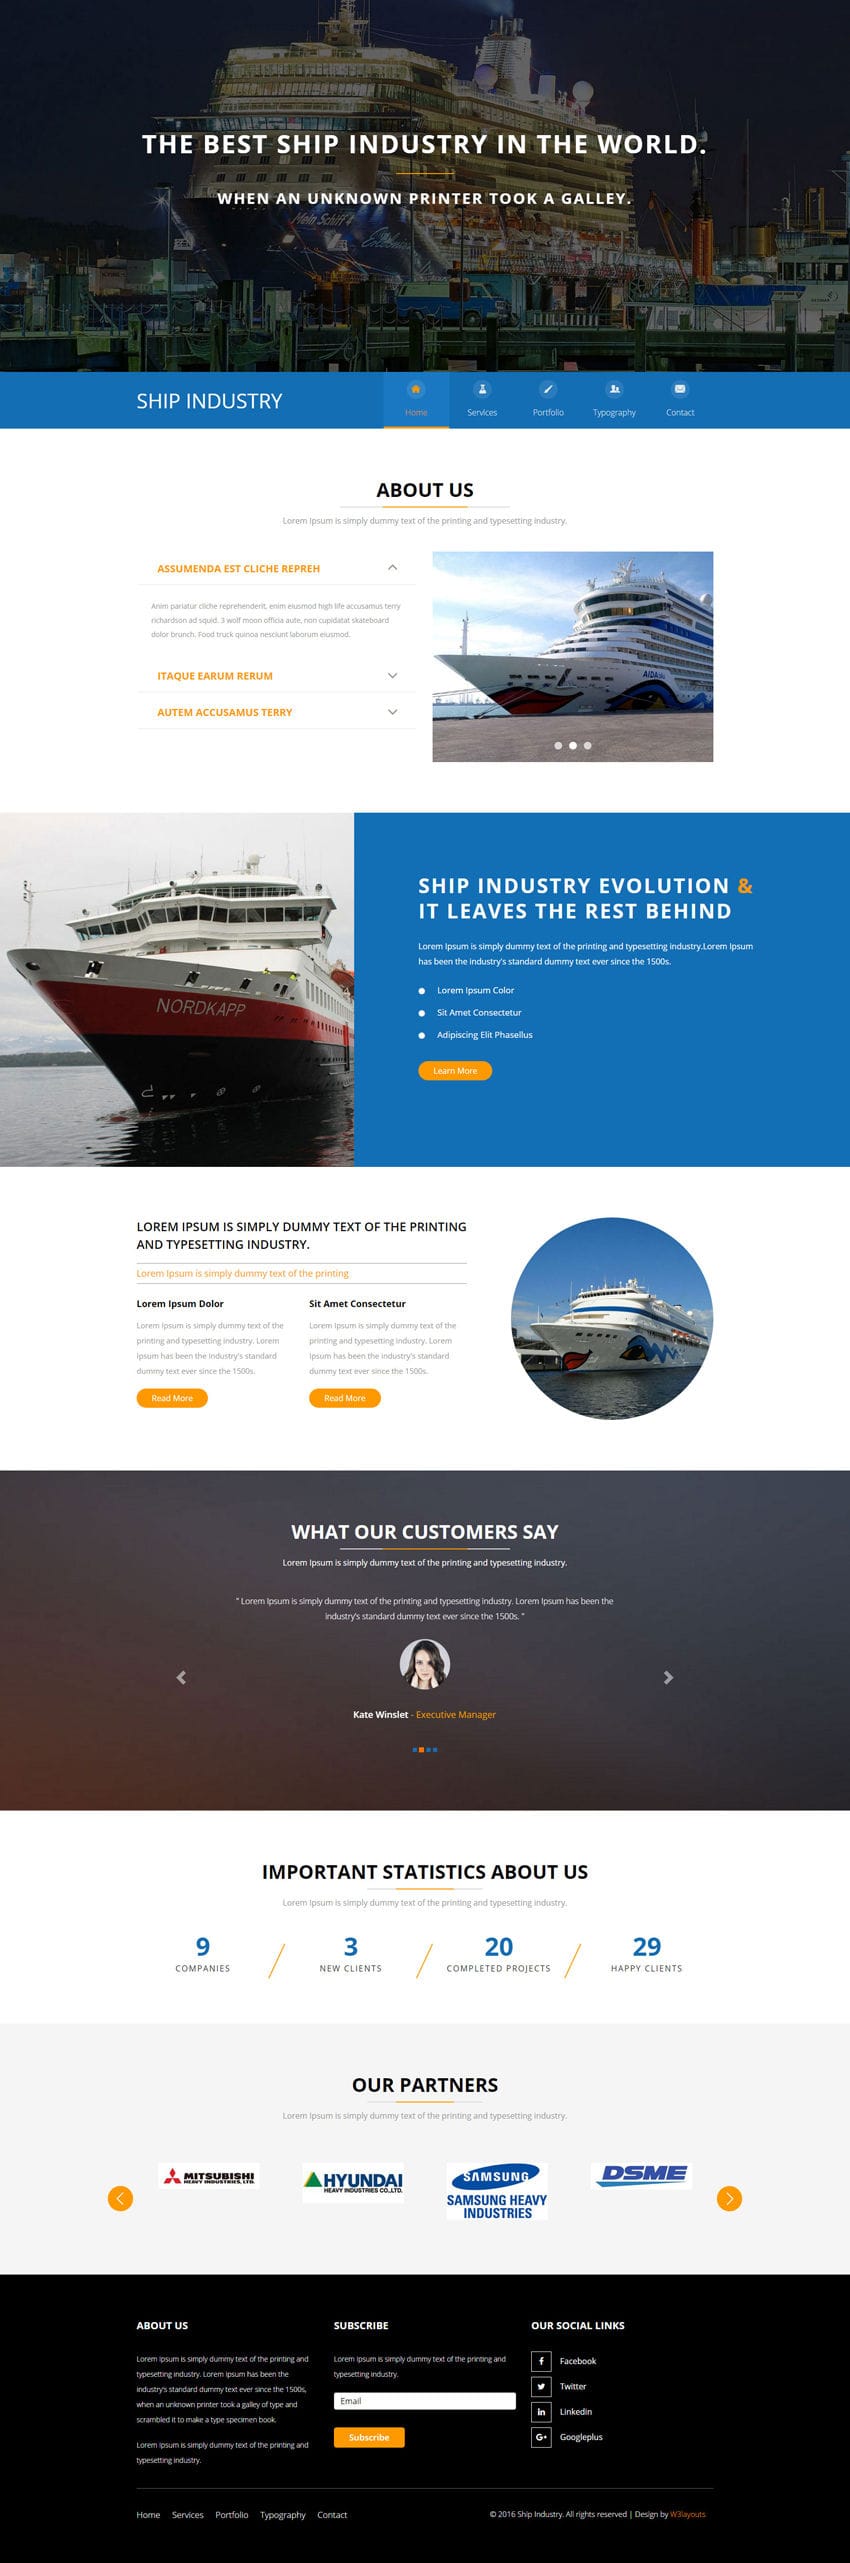 ship_industry-full-page-image-2016